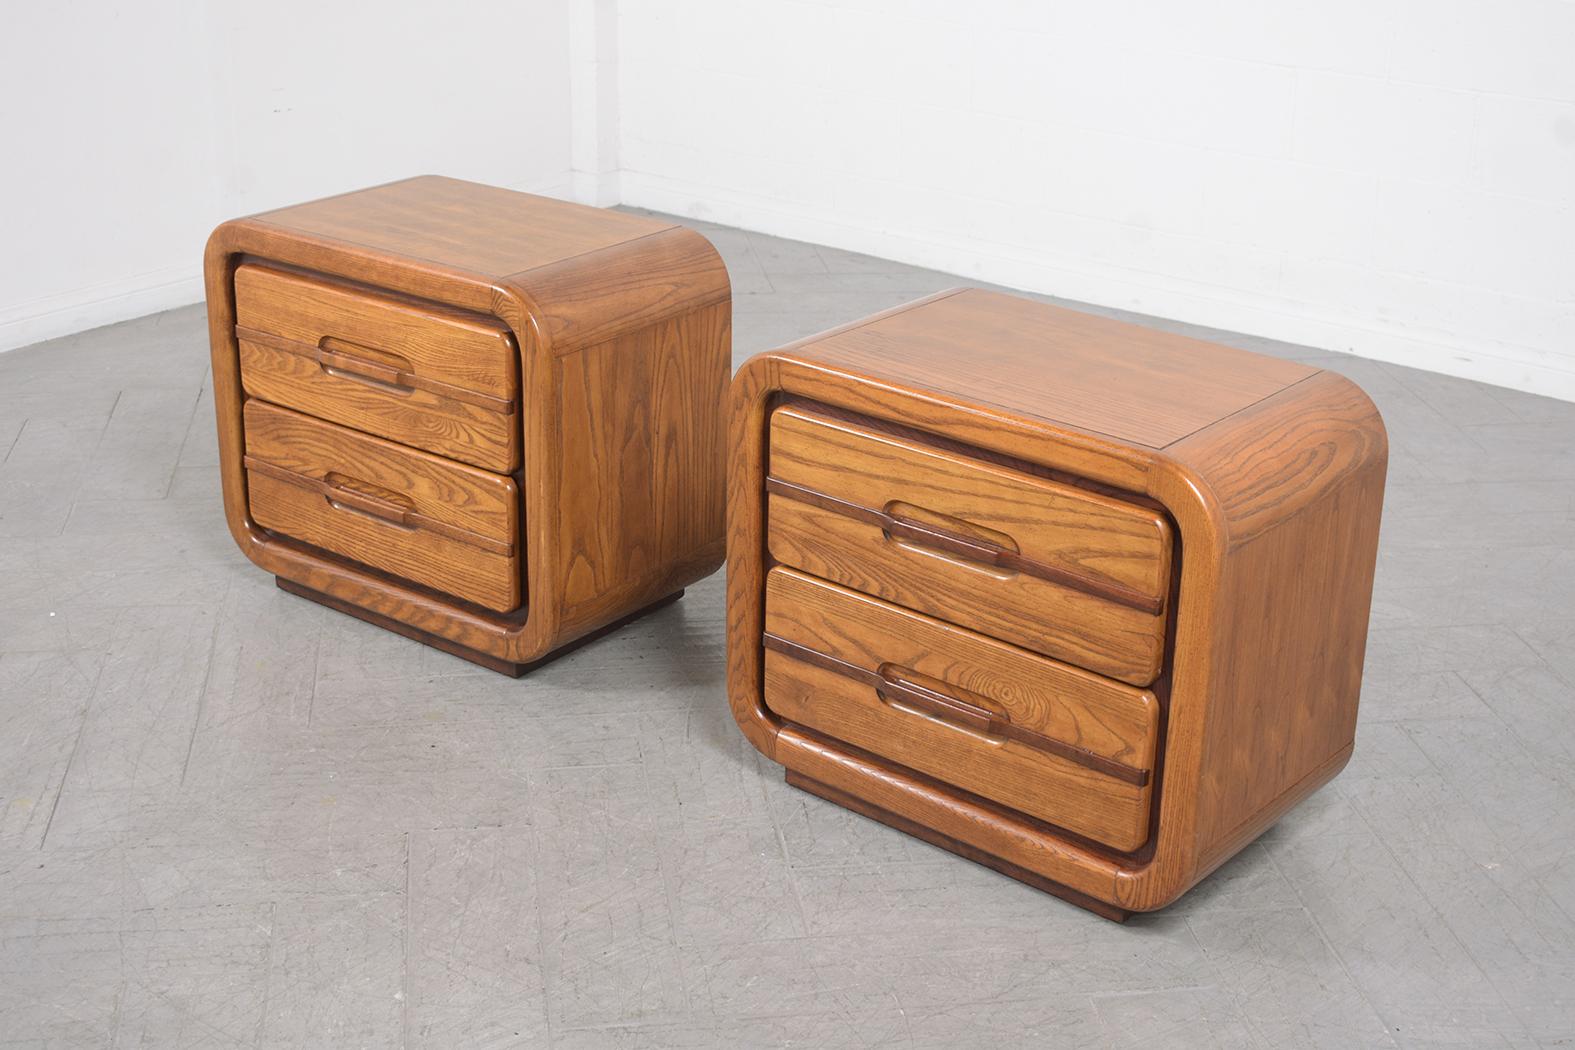 1980s-Inspired Mid-Century Modern Nightstands: Vintage Elegance Redefined In Good Condition For Sale In Los Angeles, CA